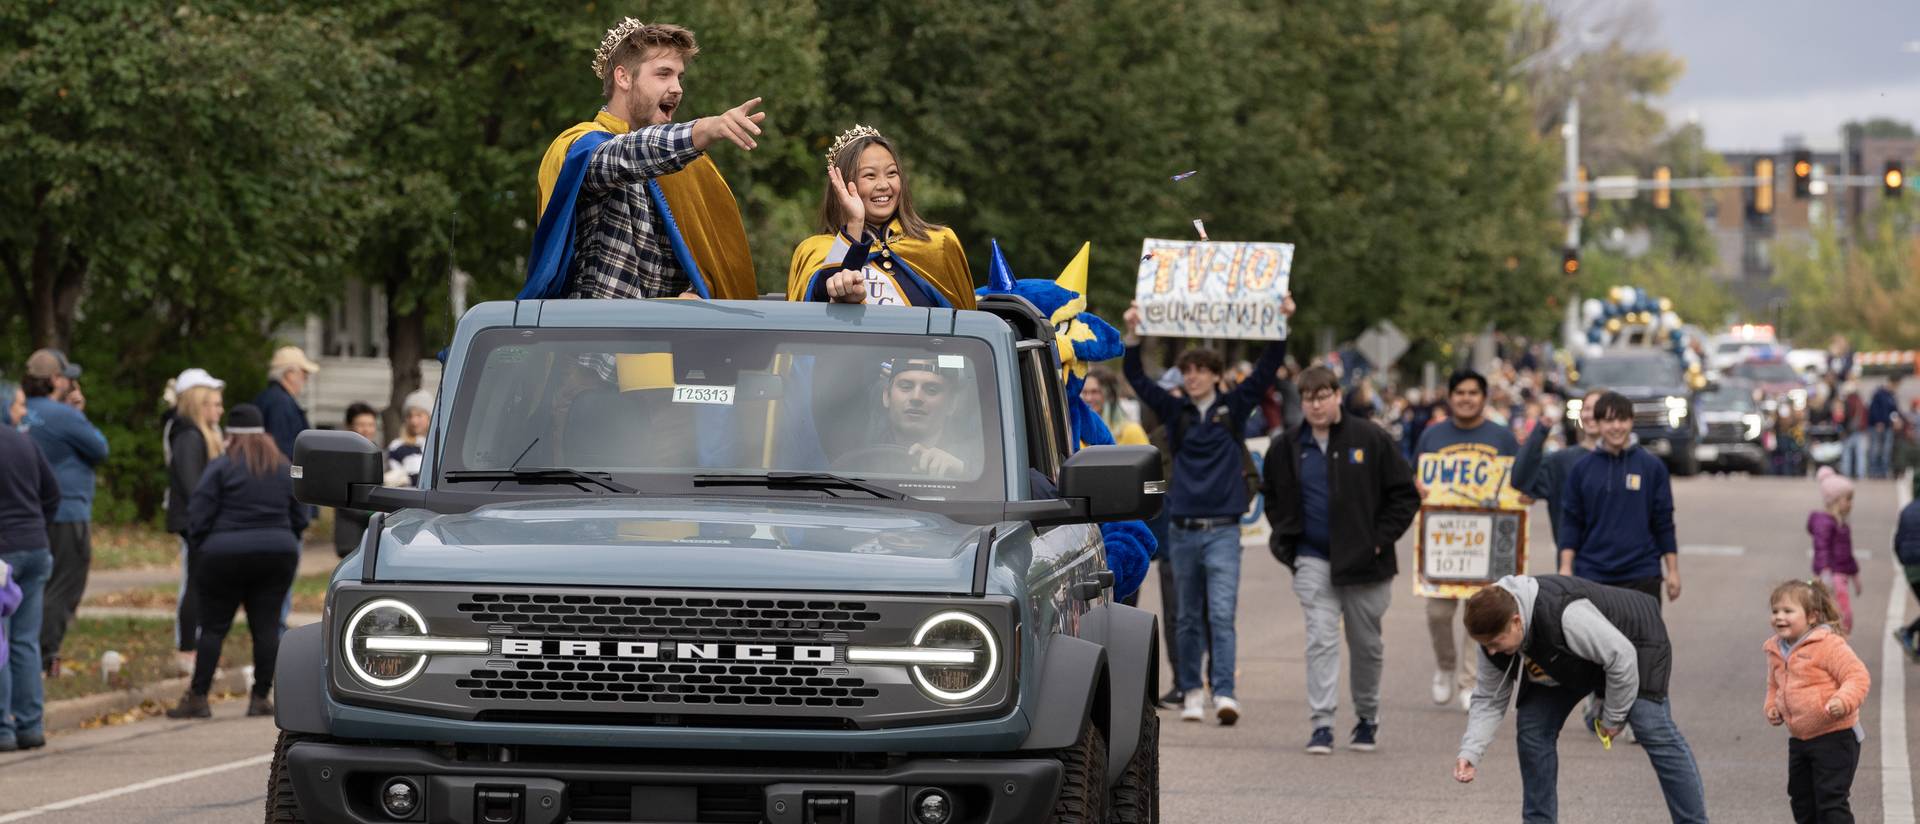 Homecoming royalty in a Bronco during 2023 Homecoming parade for UWEC